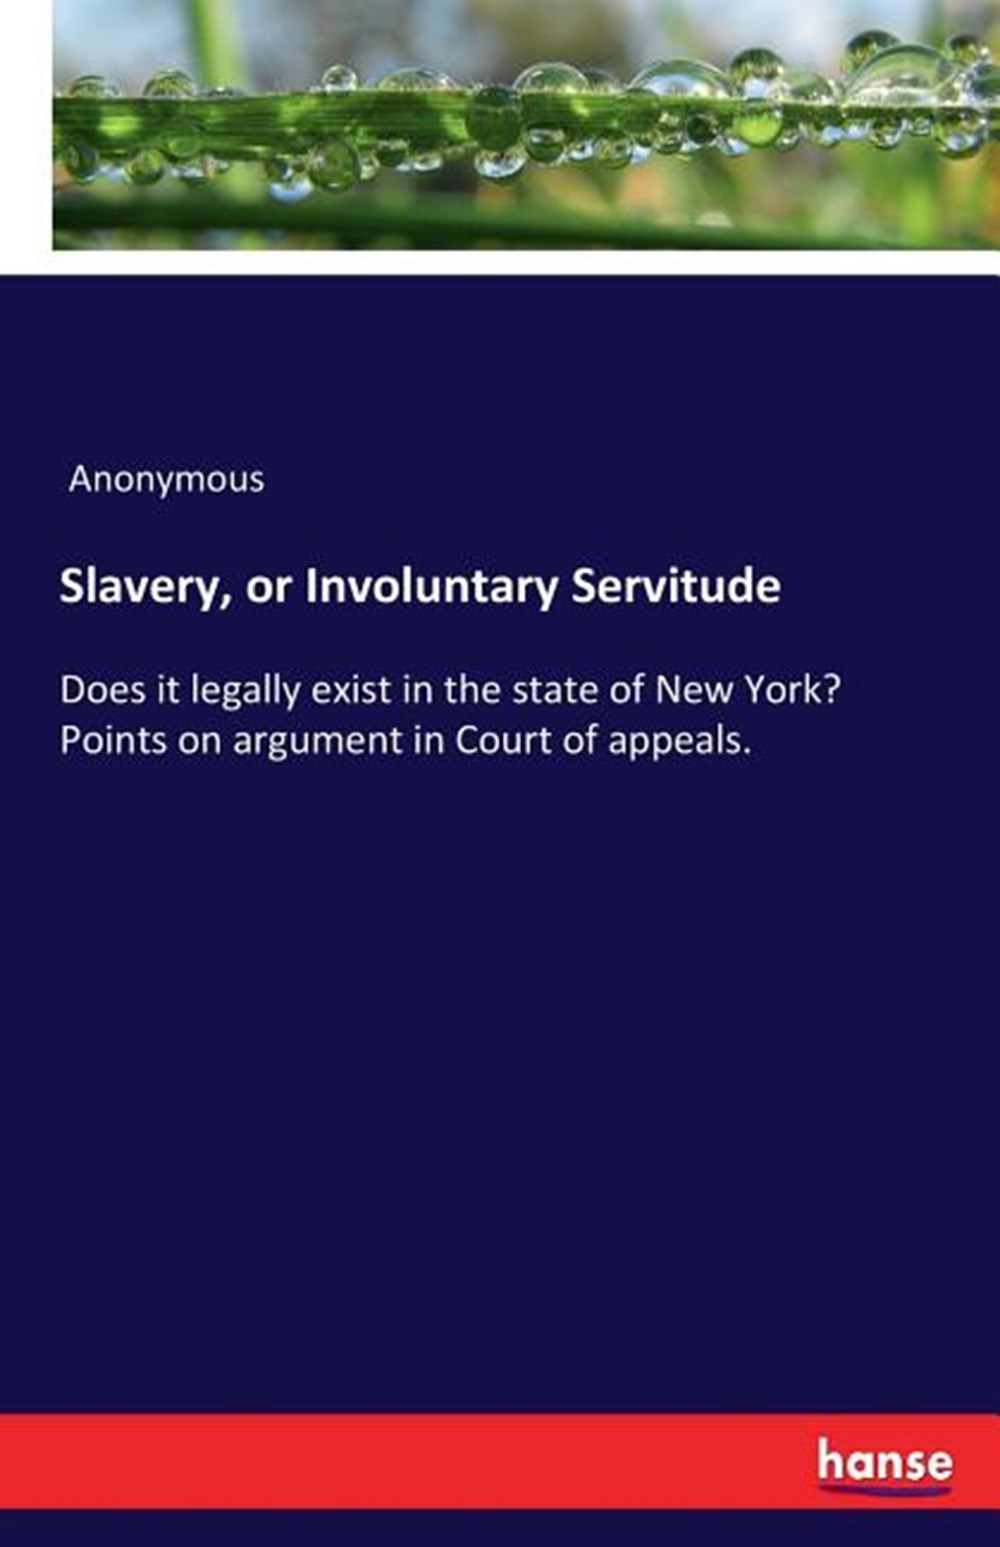 Slavery, or Involuntary Servitude: Does it legally exist in the state of New York? Points on argumen